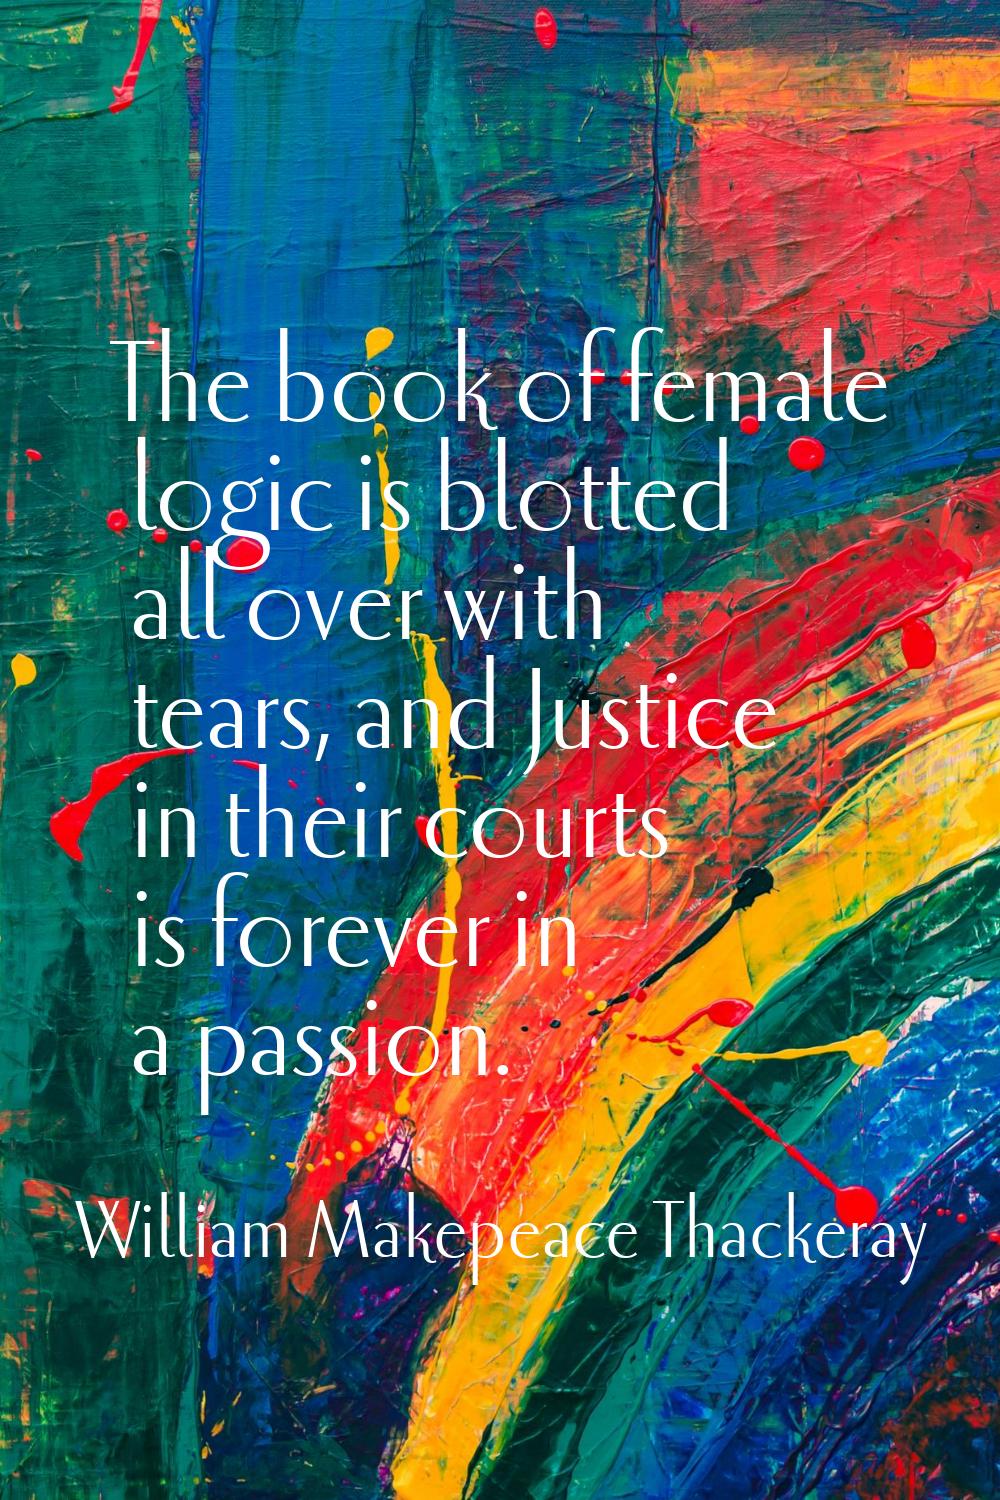 The book of female logic is blotted all over with tears, and Justice in their courts is forever in 